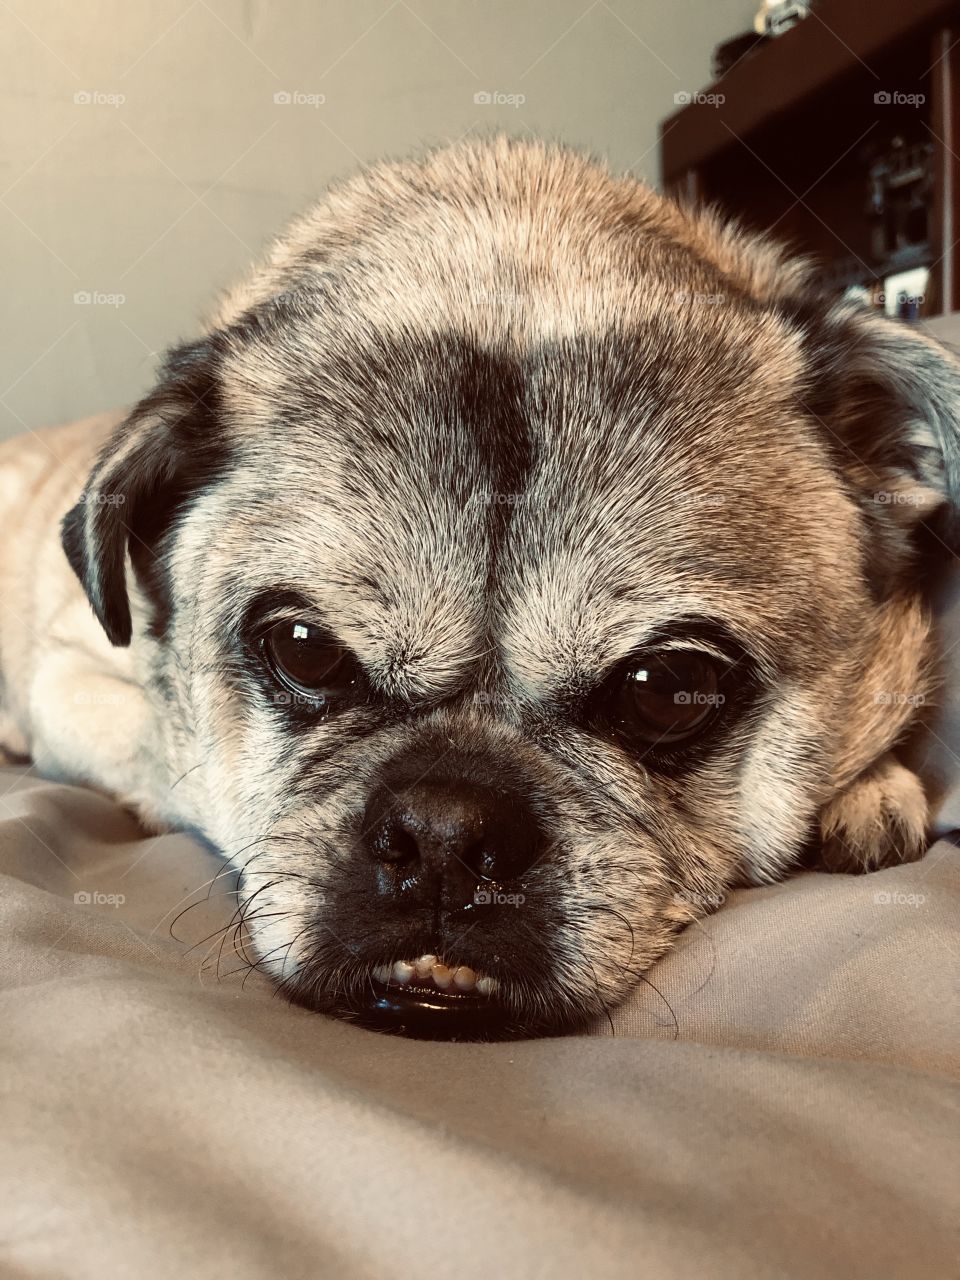 Pug mix dog on a bed close up with a serious underbite